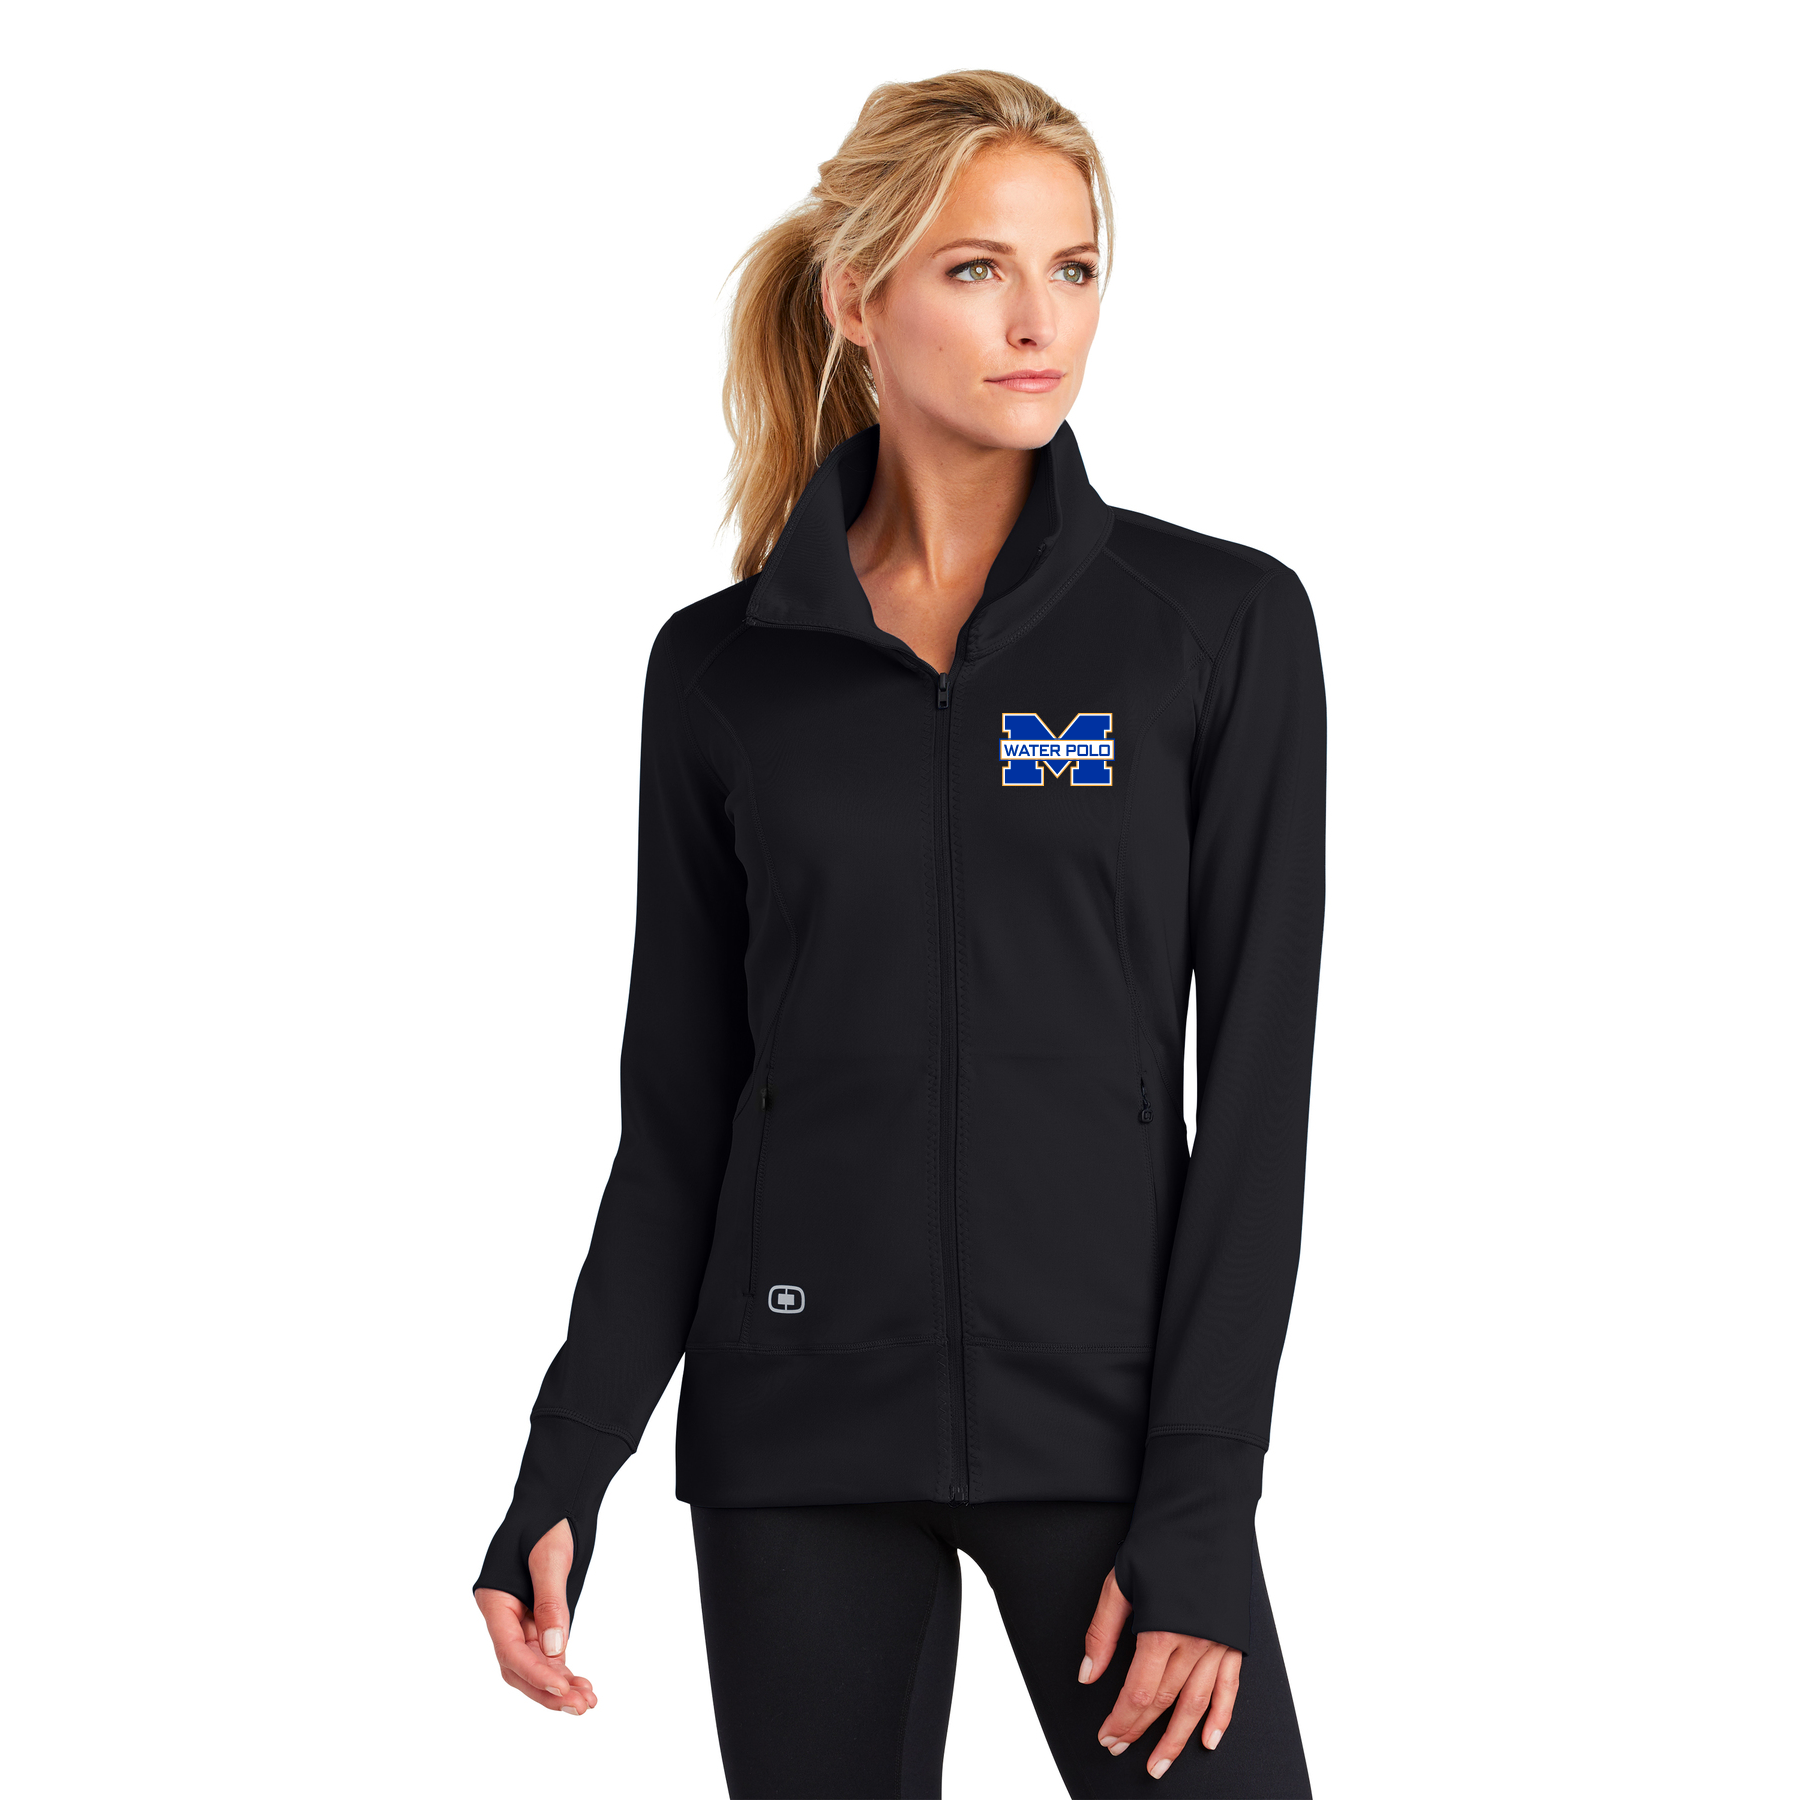 MIRA MESA WATER POLO - EMBROIDERED PERFORMANCE JACKET